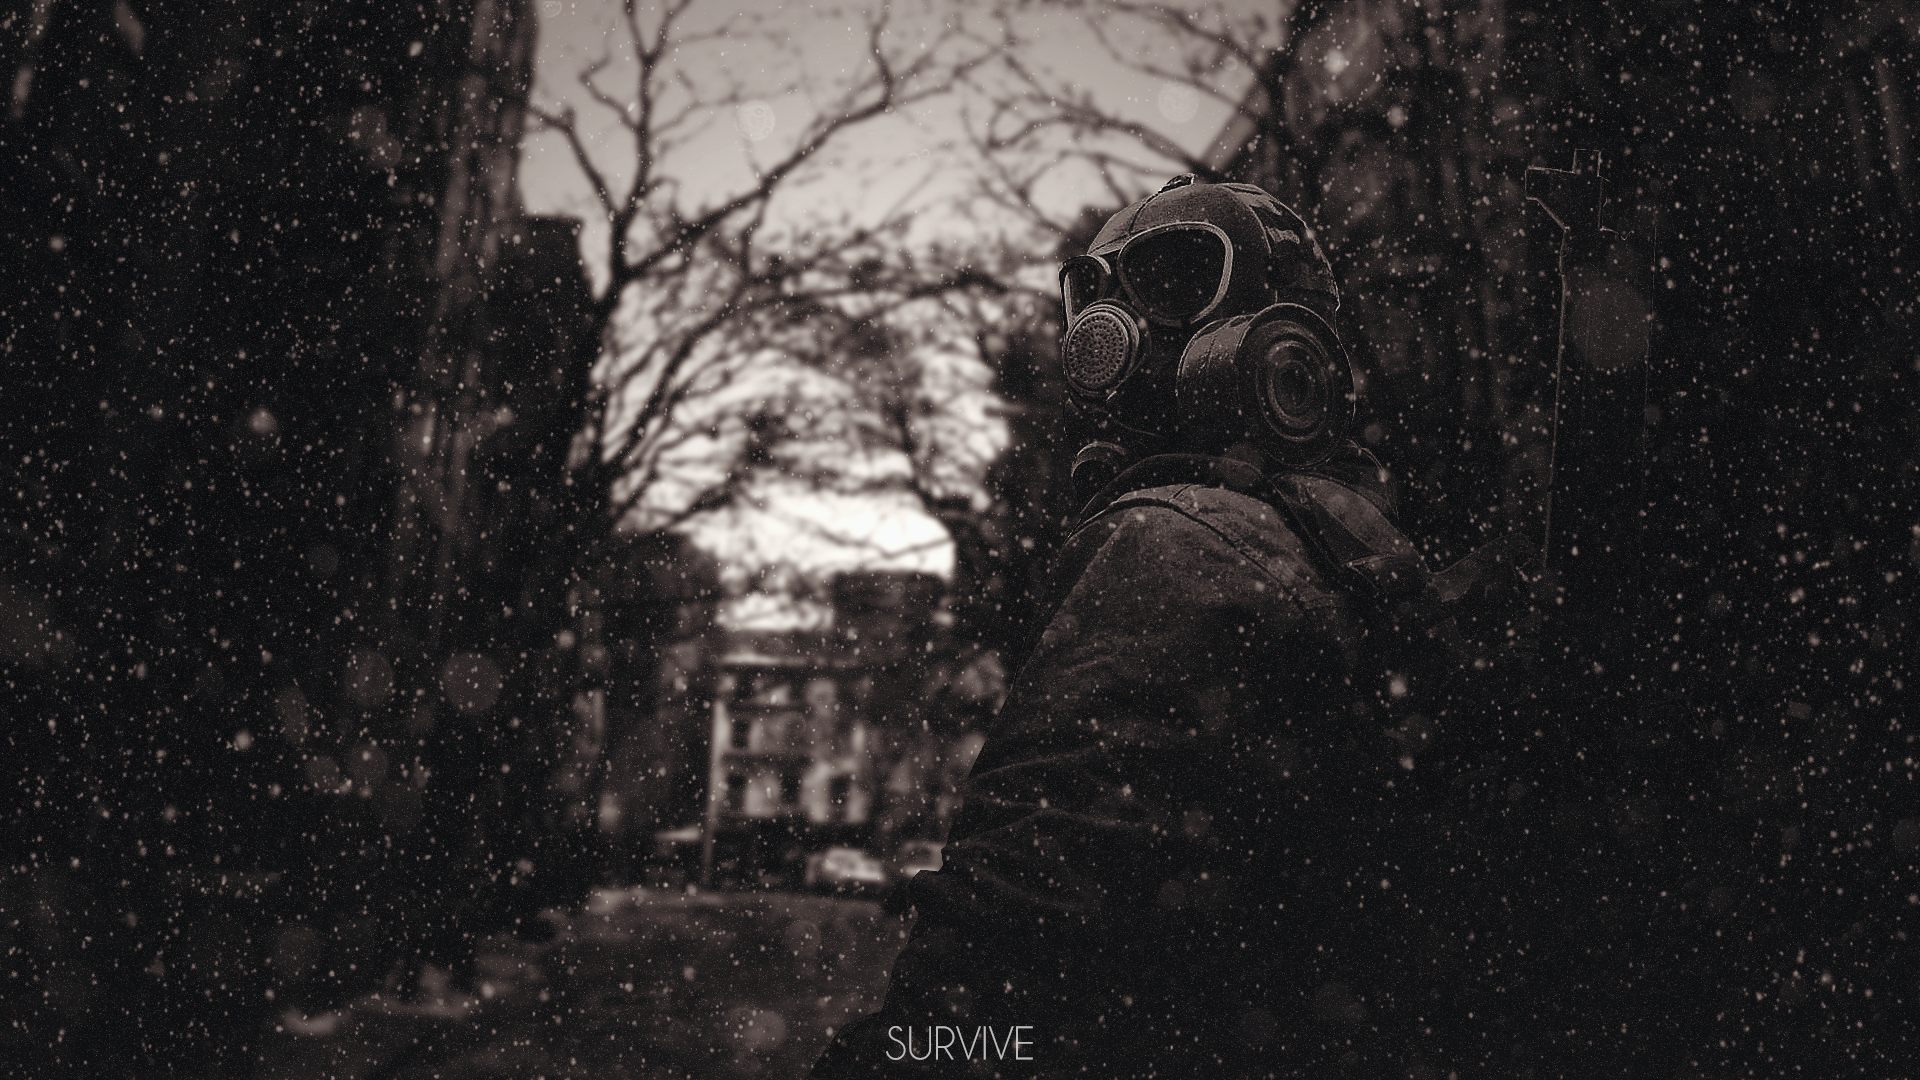 General 1920x1080 gas masks sepia survival apocalyptic text monochrome blurred blurry background branch